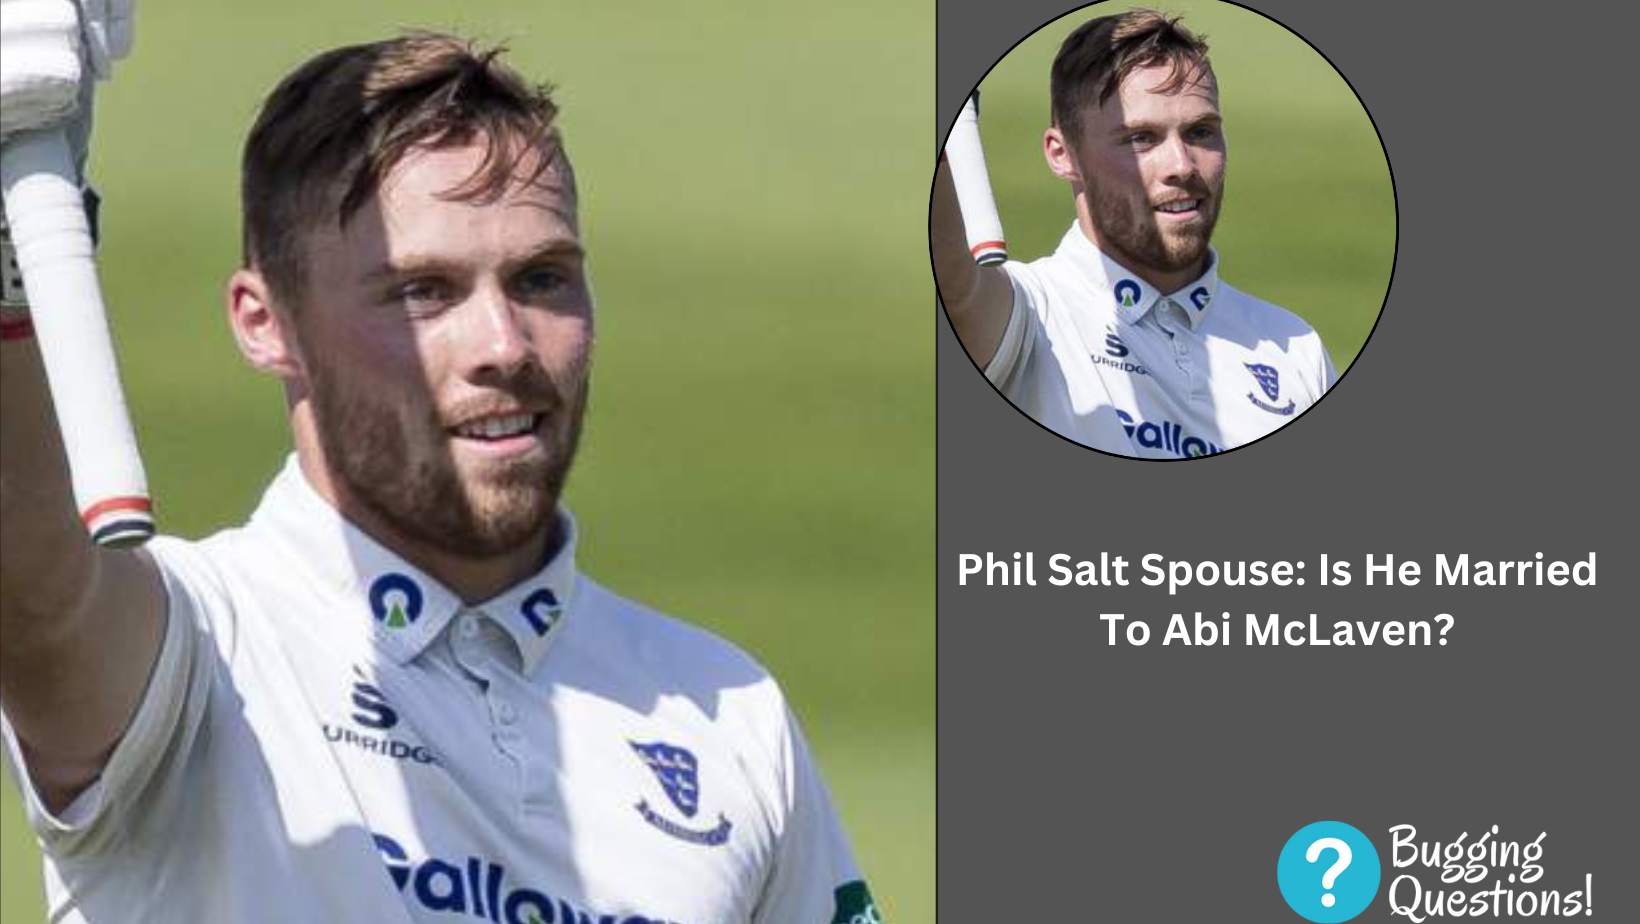 Phil Salt Spouse: Is He Married To Abi McLaven?